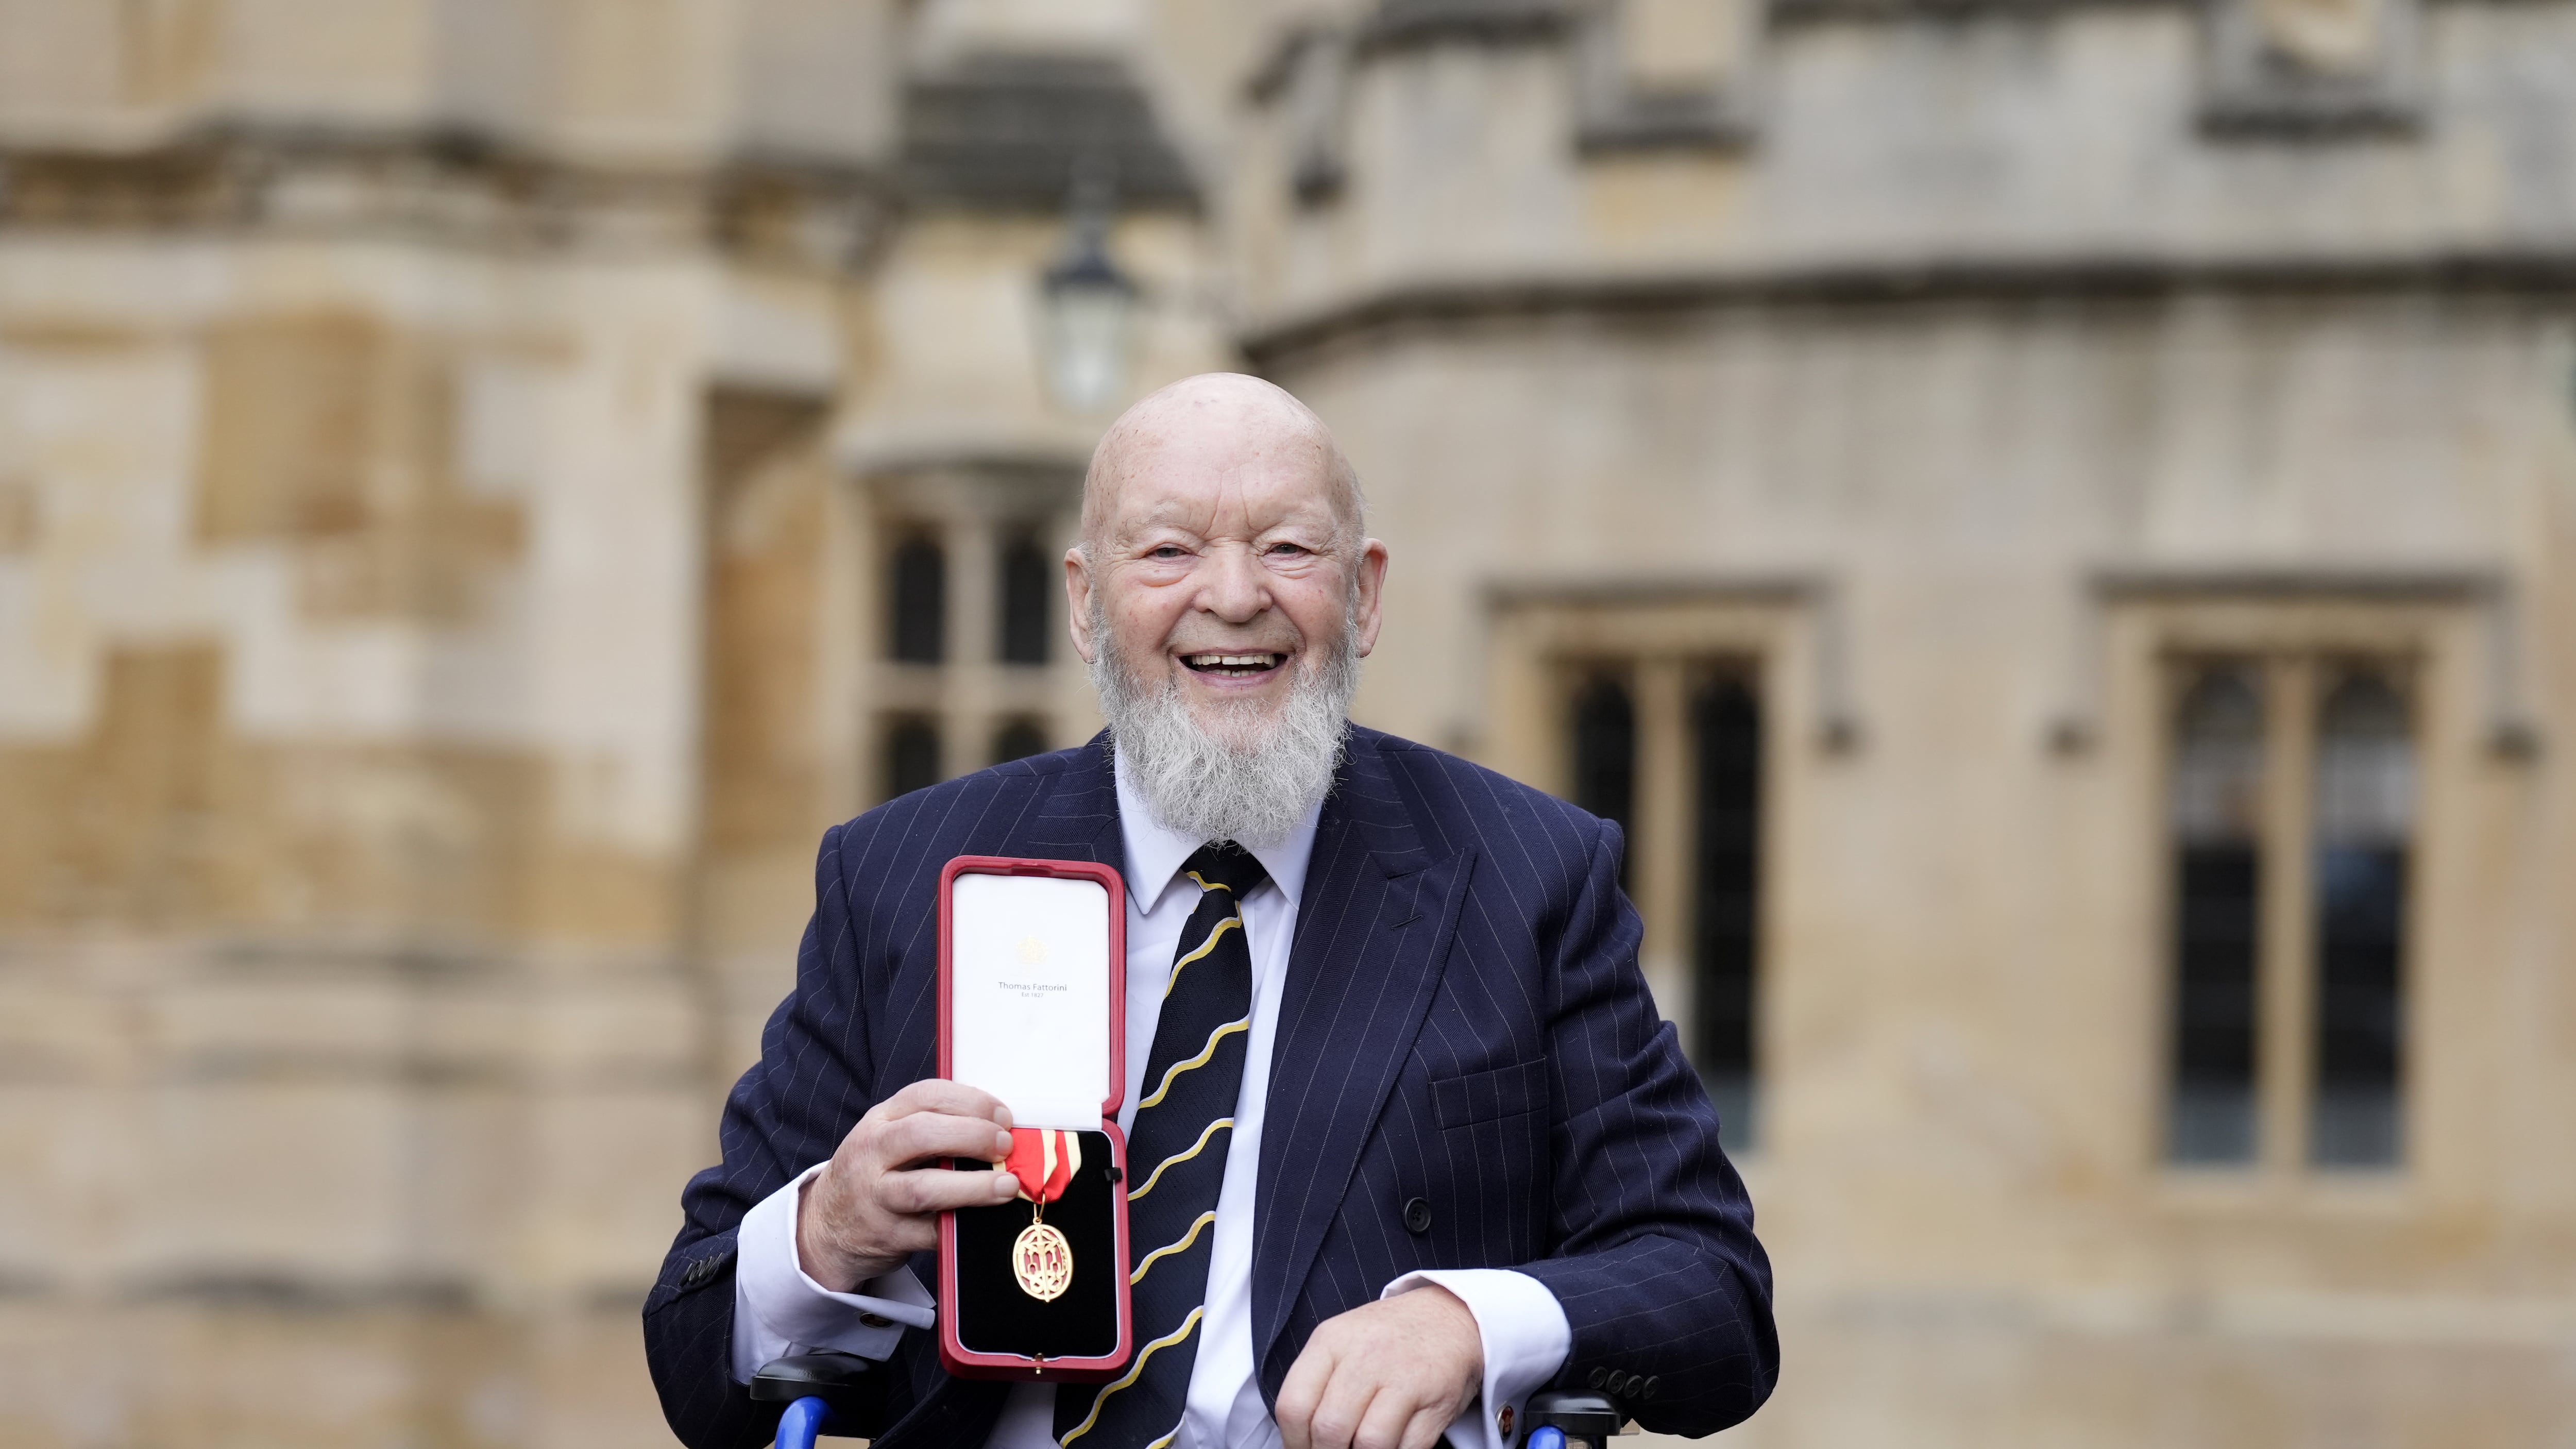 Sir Michael Eavis was knighted at Windsor Castle